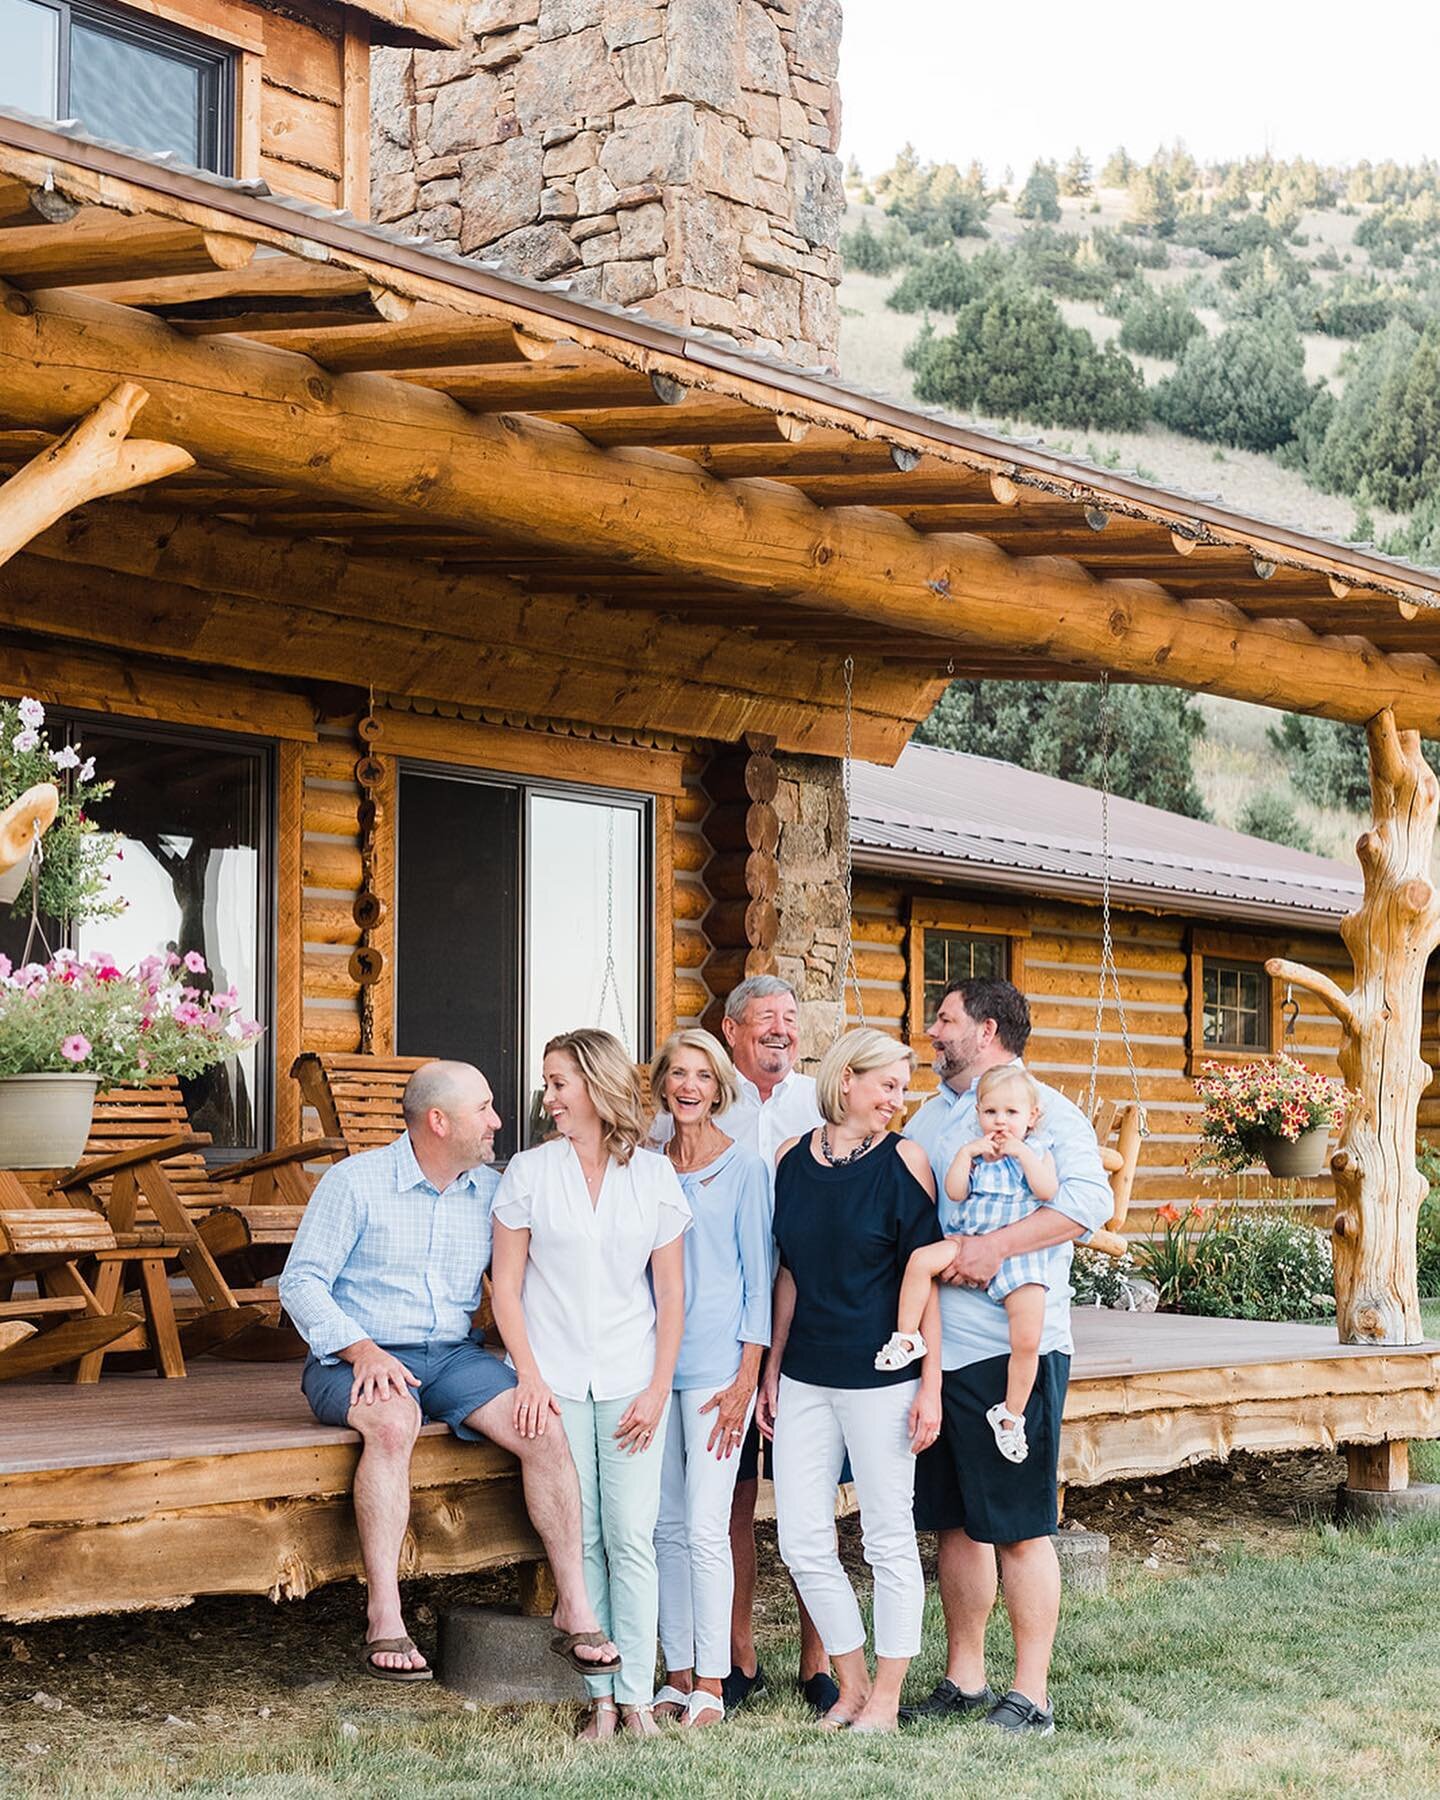 ✨Generational family session✨

Ventured over to Ennis and onto this beautiful property last week to photograph the Newman family. This location was close to where I ran a 50k last month and it was so fun to be up in those hills and mountains again! I